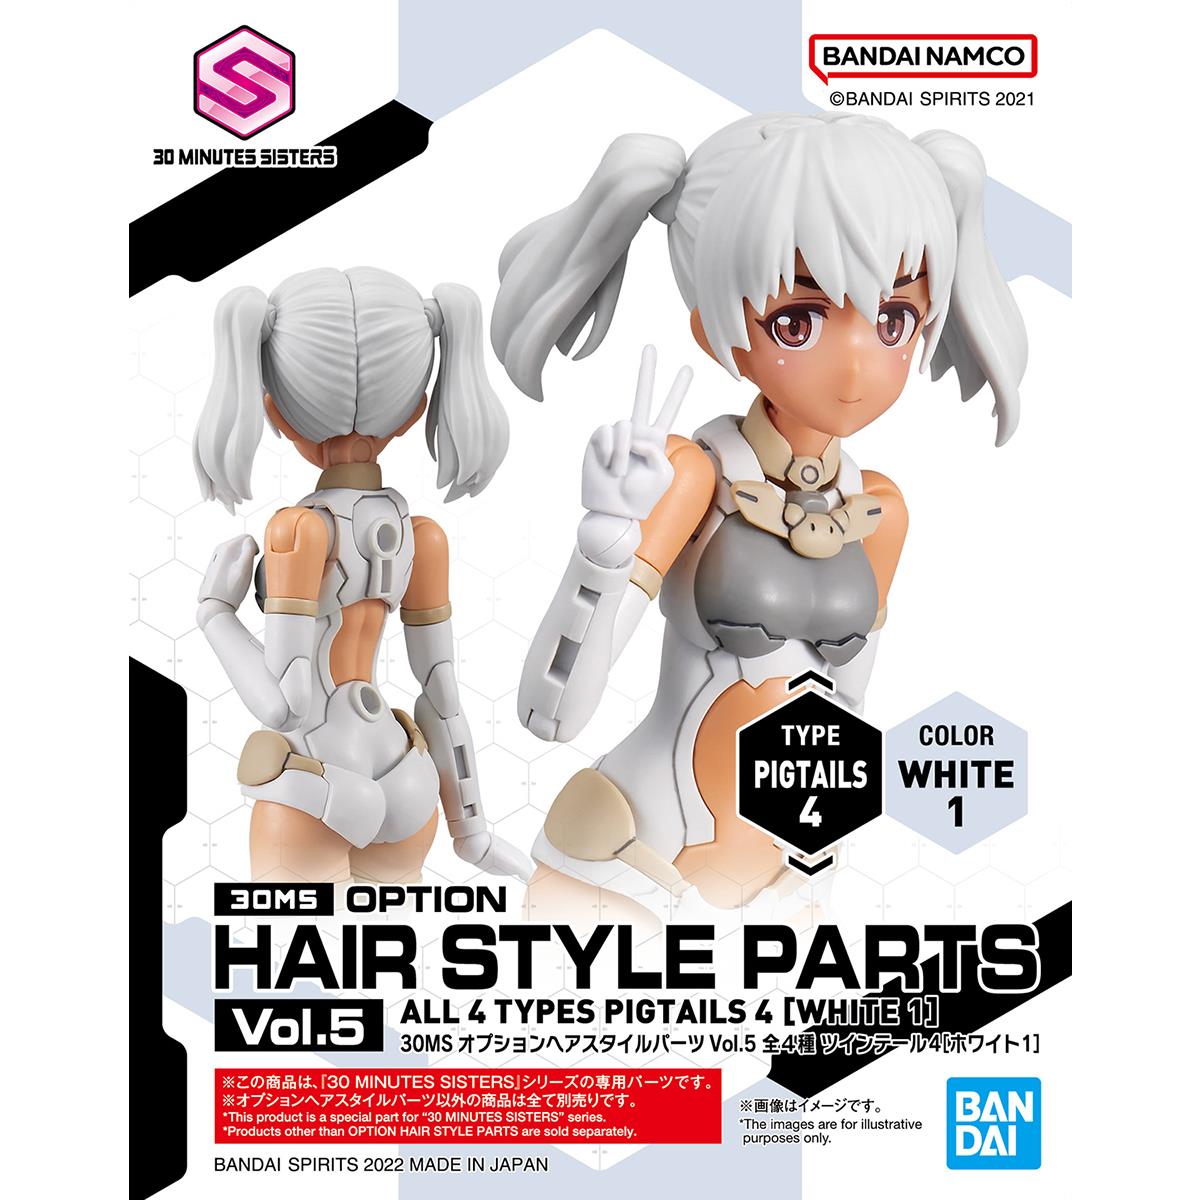 30 Minutes Sisters: Option Hair Style Parts Vol. 5 Model Option Packs